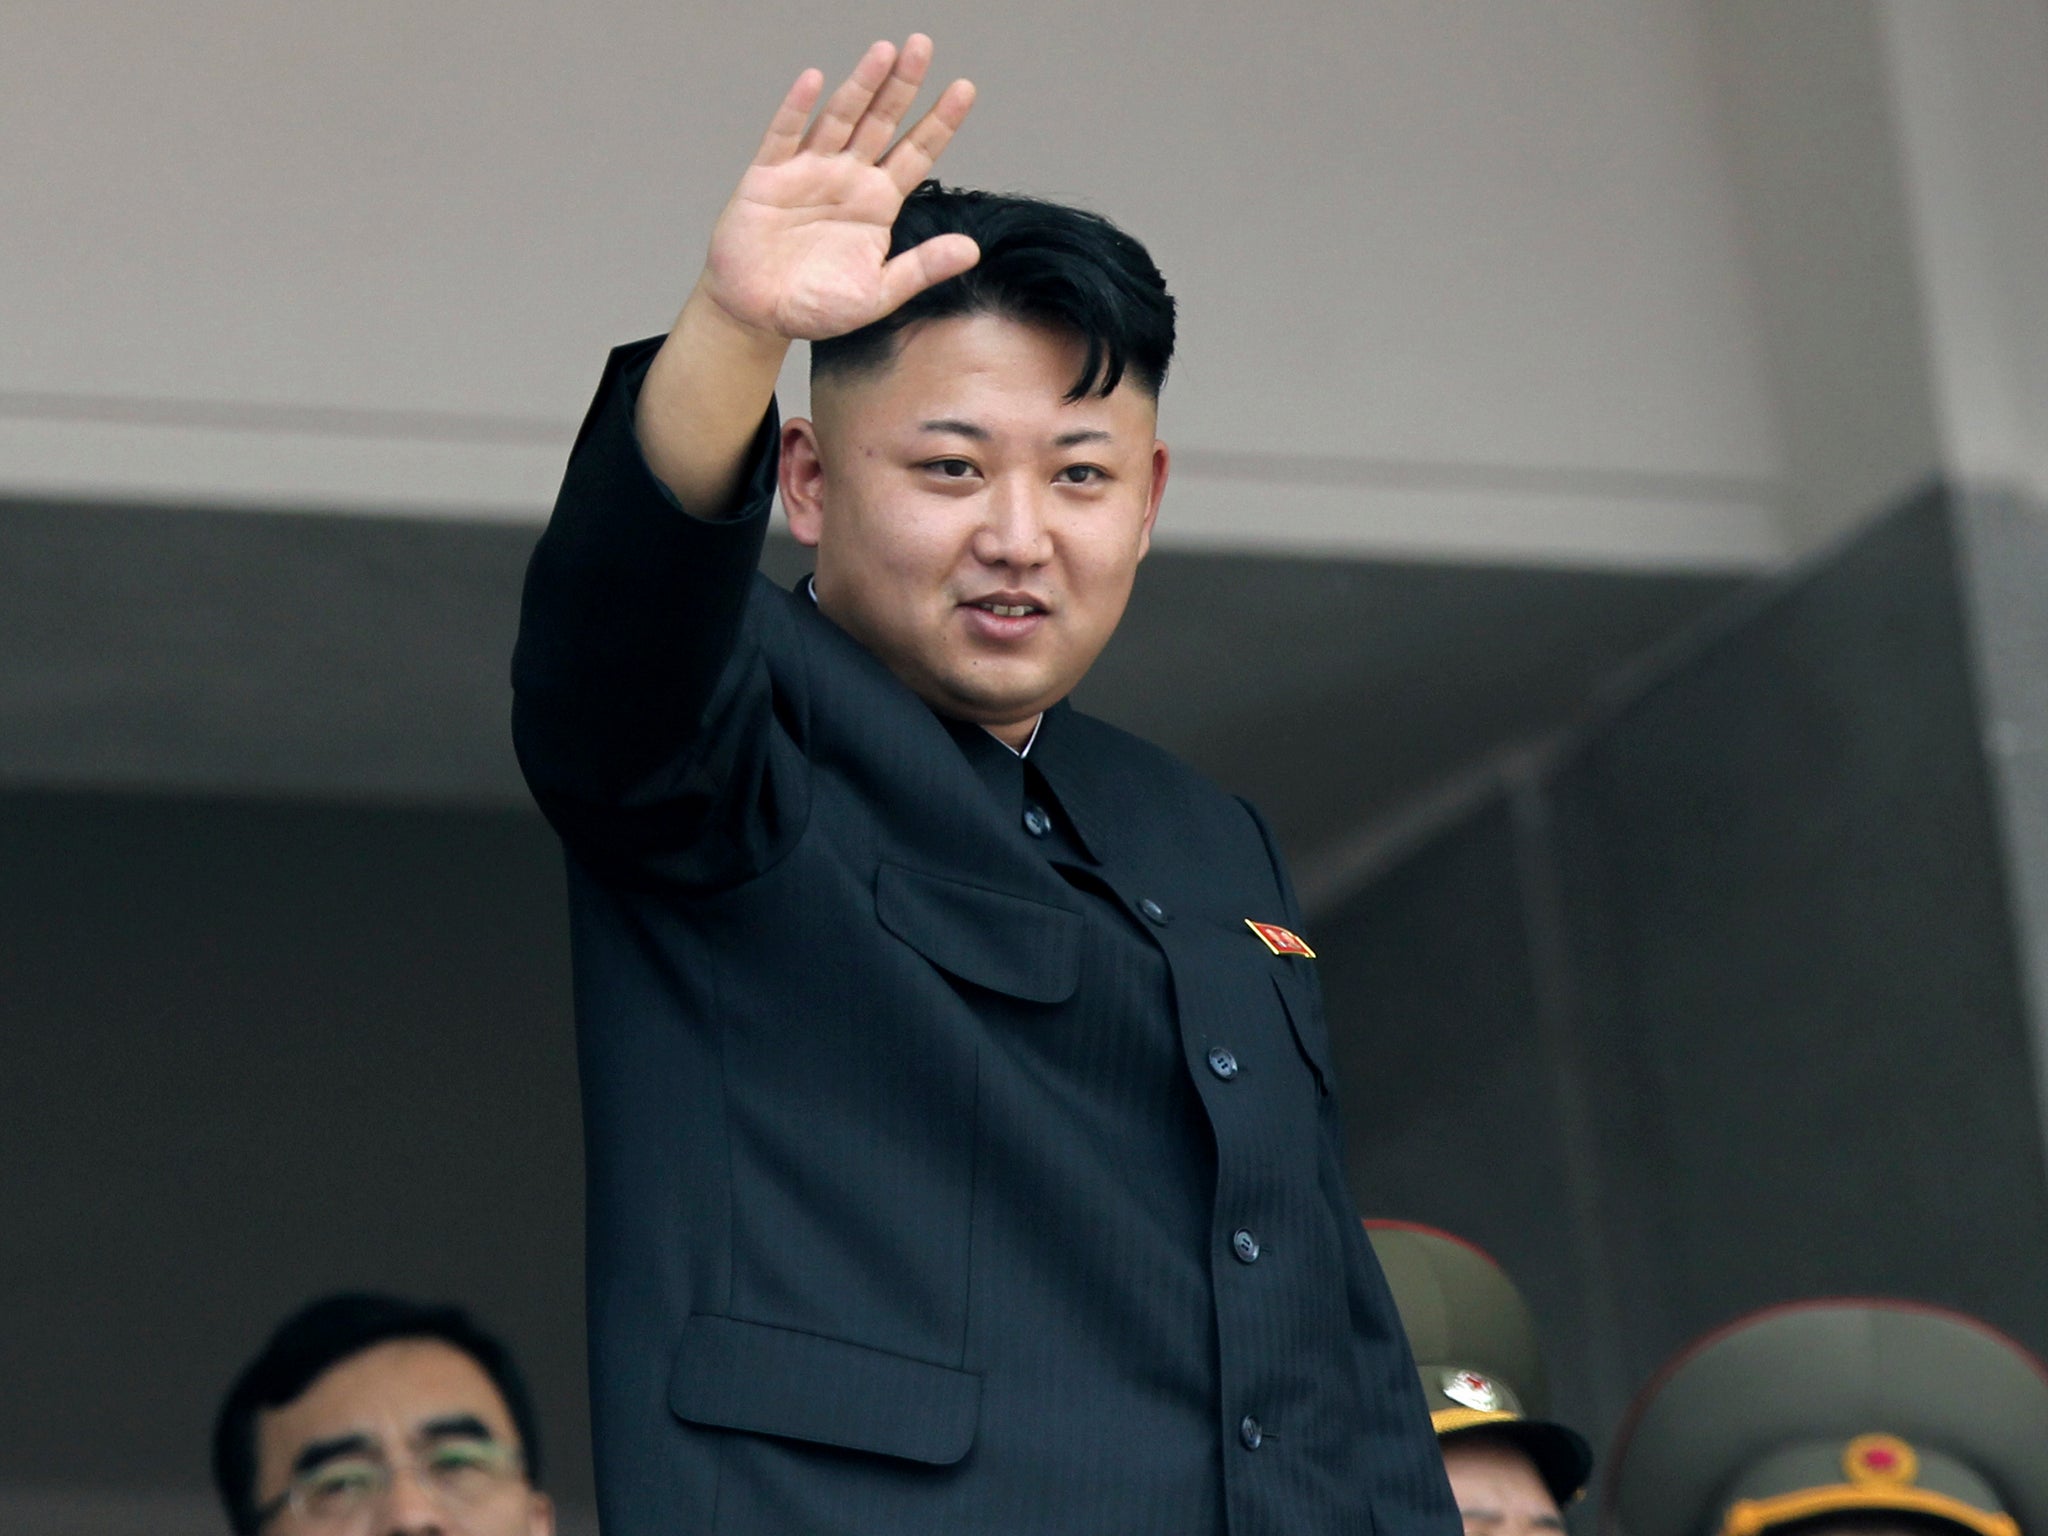 Kim Jong-un waves to spectators during a 2013 military parade